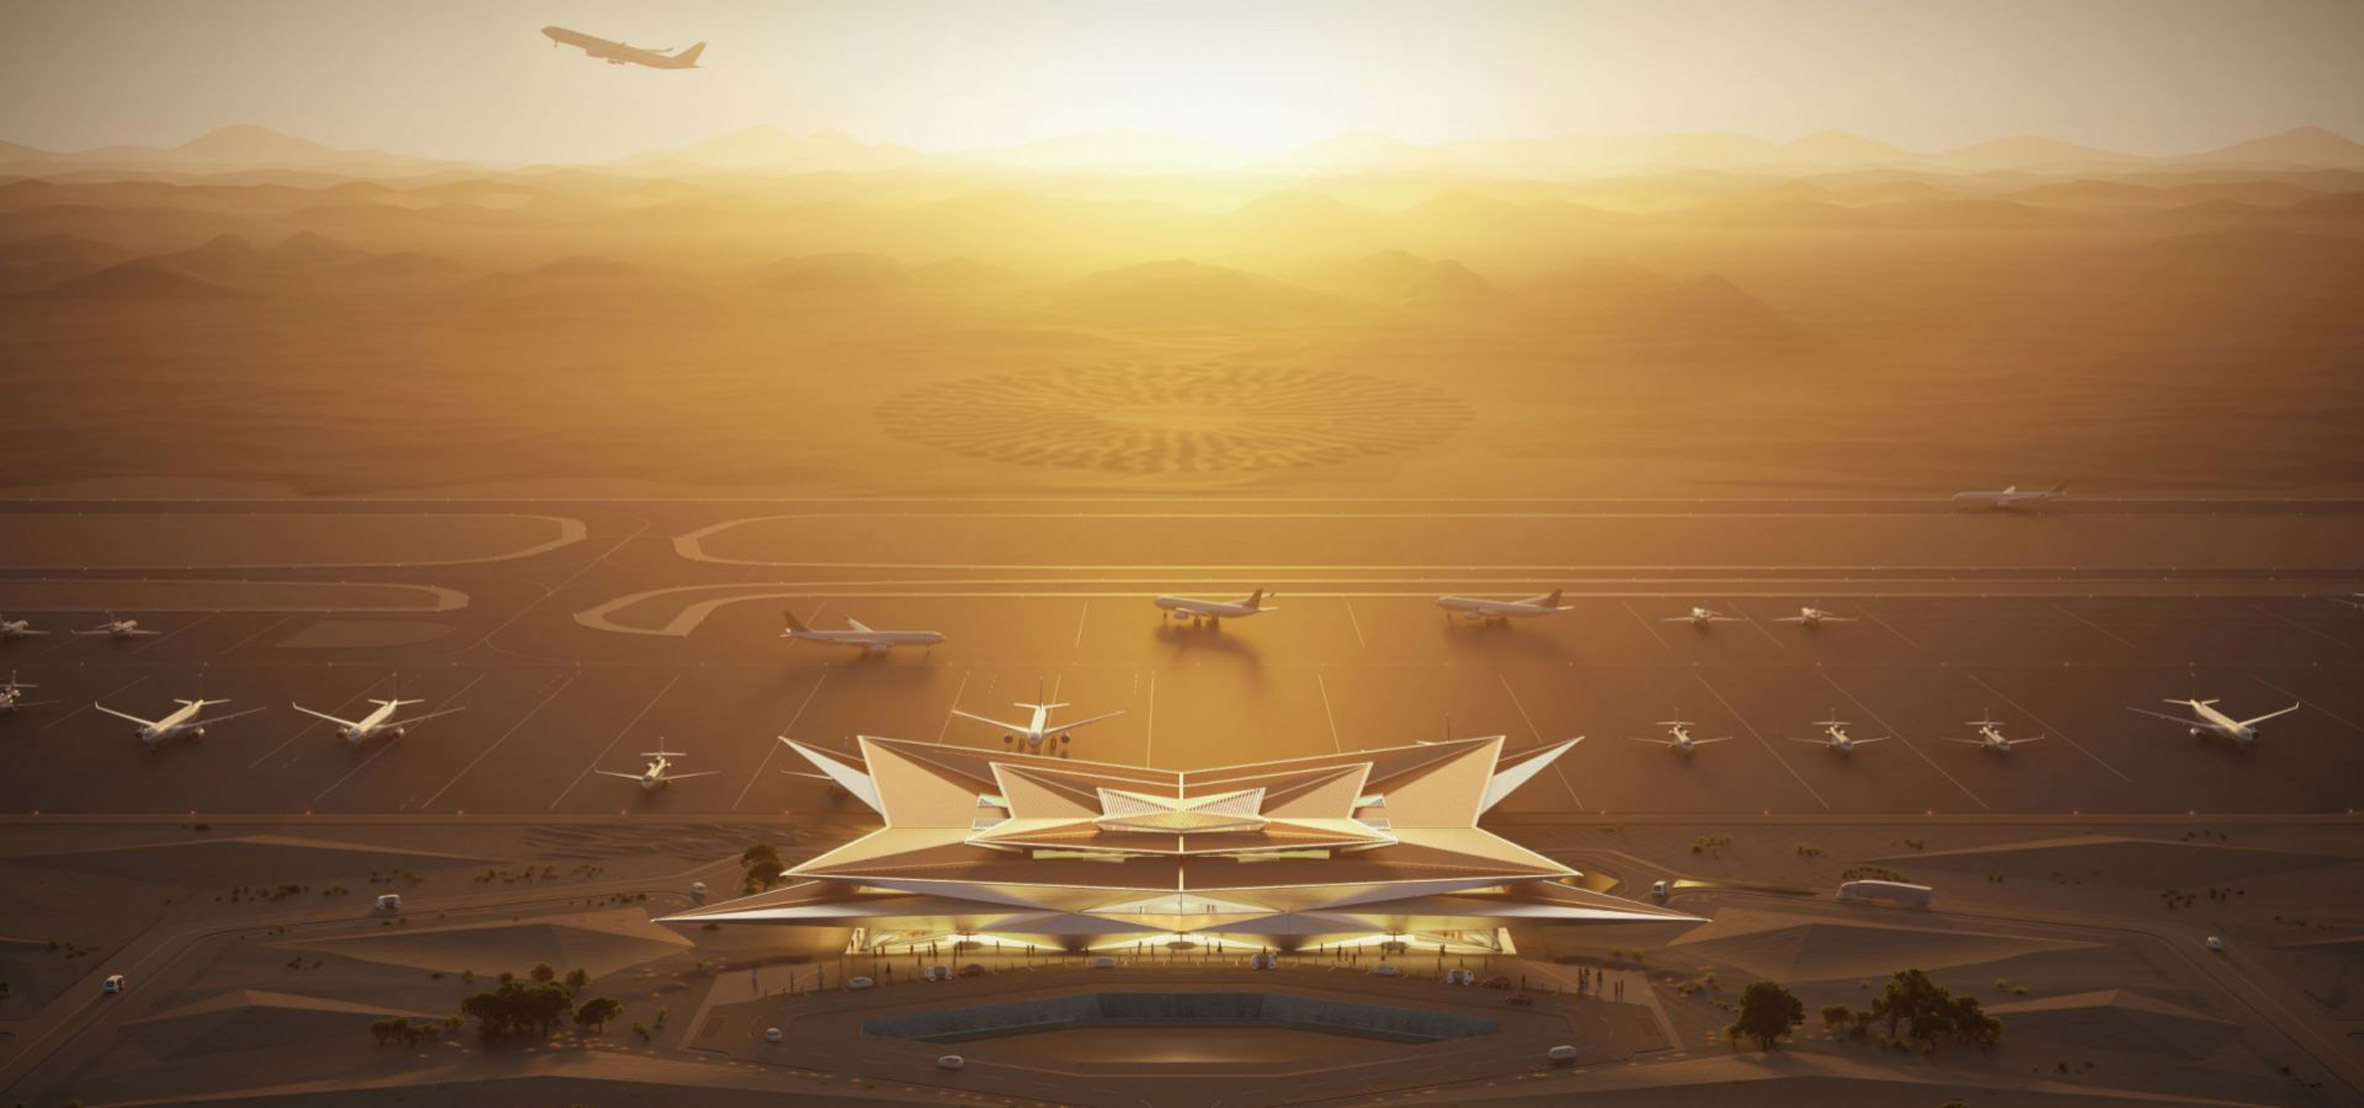 ACAN calls on Foster + Partners to withdraw from Amaala airport project